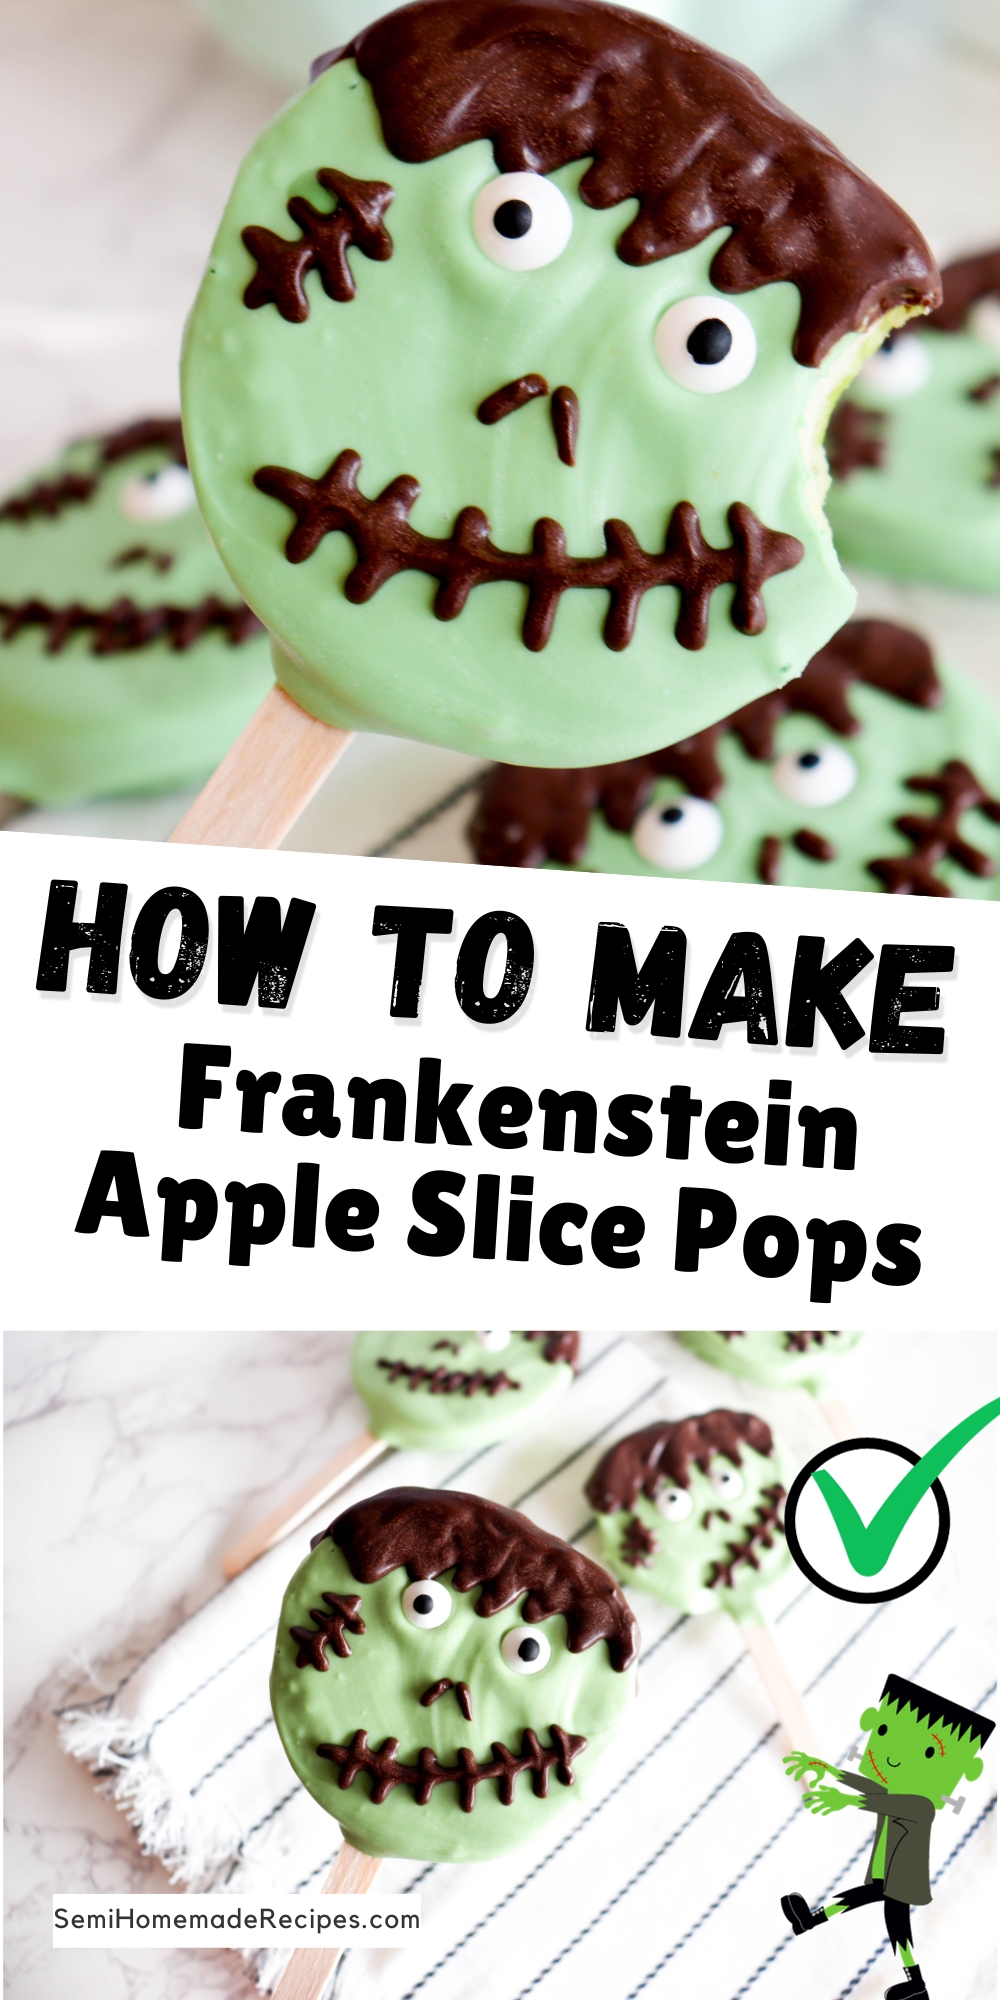 Looking for a healthier alternative to over the top sugary Halloween treats? Look no further than Frankenstein apple slice pops! These fun Halloween apple slice pops still have some chocolate on them but they're mostly apple, which counts as healthy version of Halloween treats compared to others. 